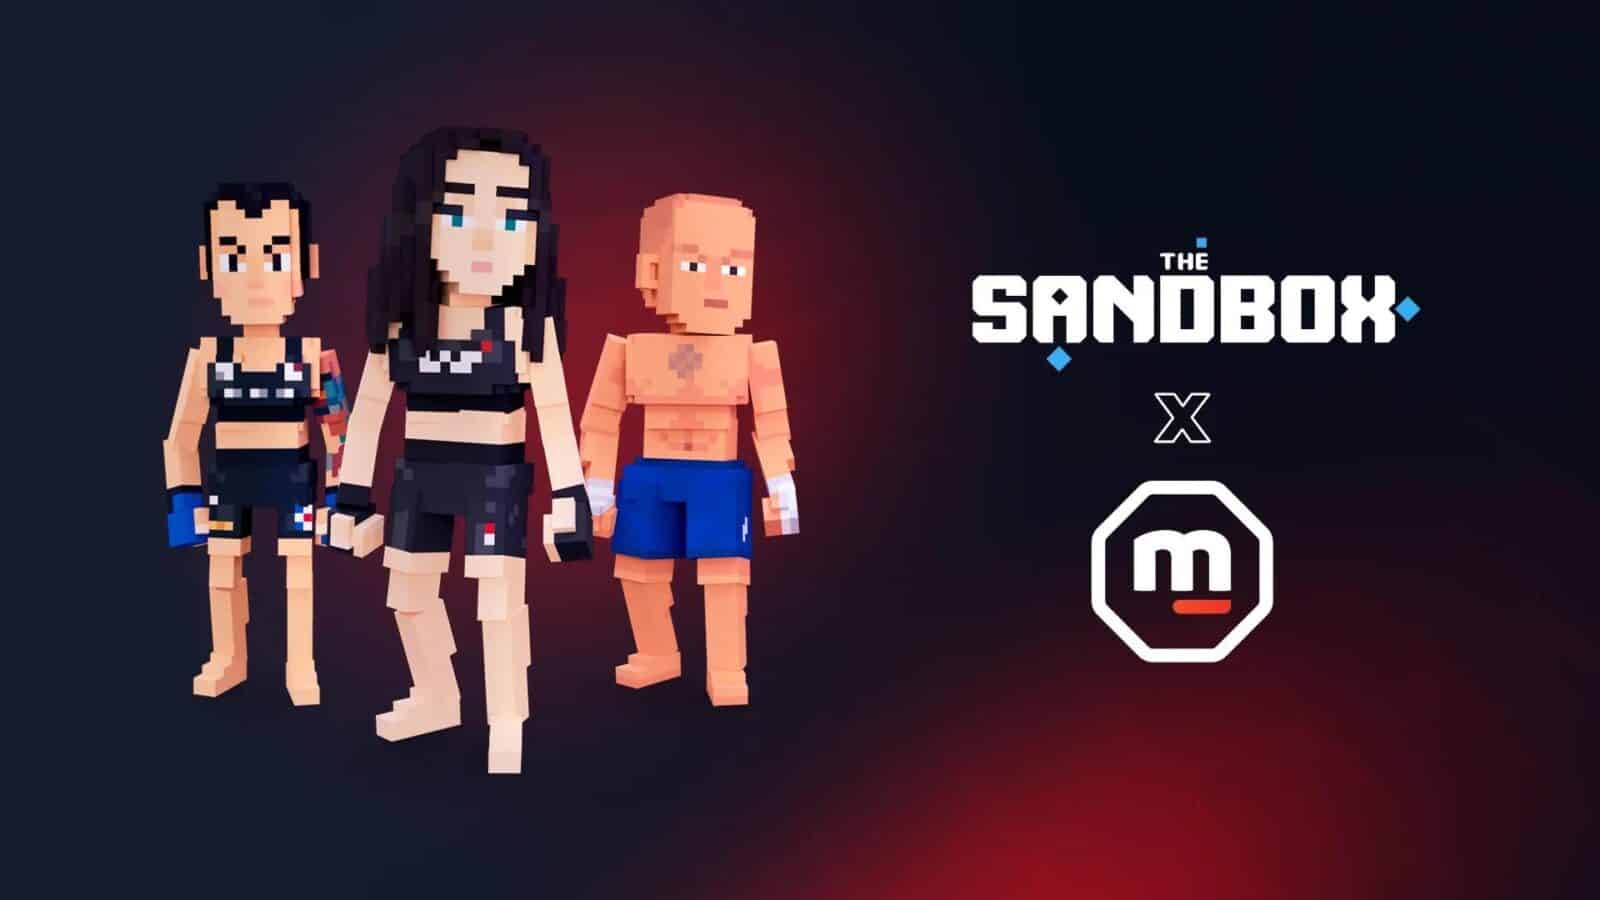 The Sandbox Joins Forces with MetaFight for a Unique MMA Themed Virtual Experience The Sandbox, a major player in the virtual gaming industry, has recently teamed up with MetaFight, a popular MMA management game. This collaboration will create a unique, limited-time Mixed Martial Arts (MMA) themed experience within the virtual realm of The Sandbox.